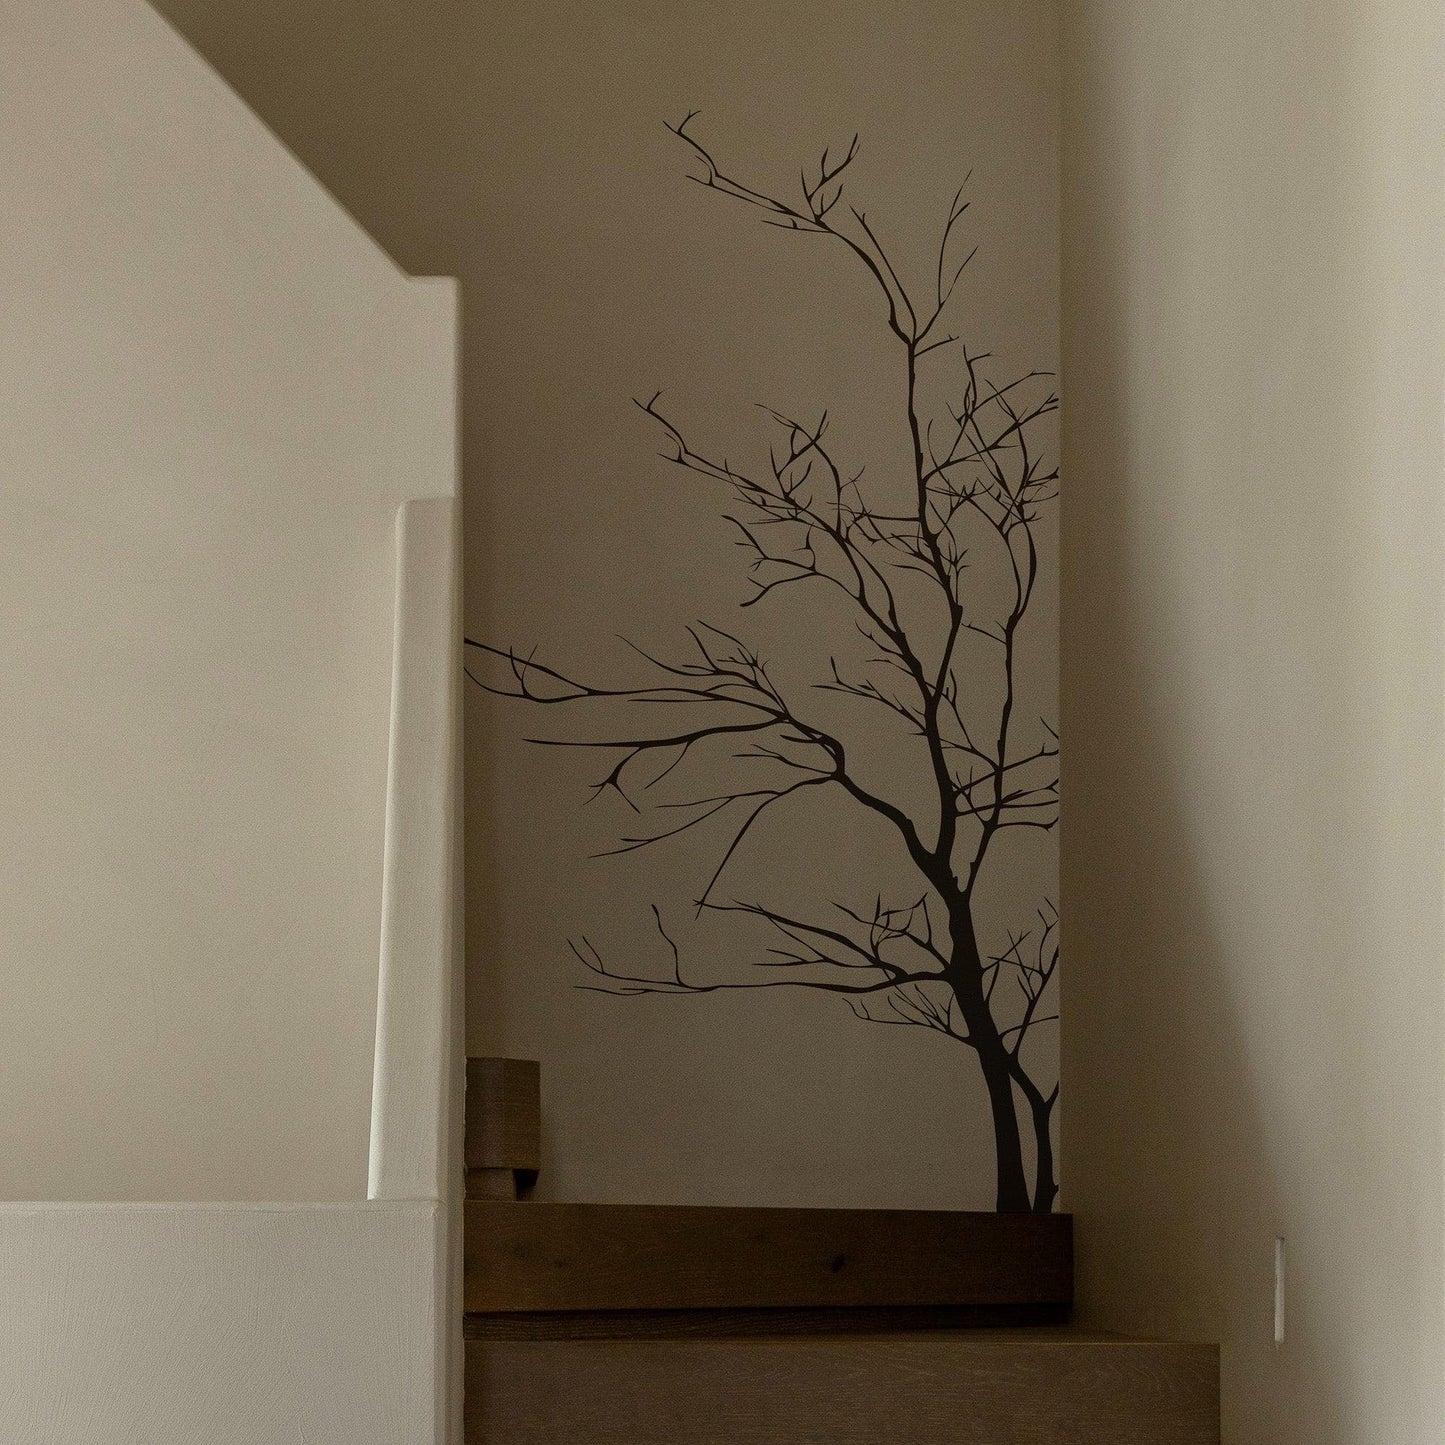 Bare Tree Branches Vinyl Wall Decal Sticker. #AC223